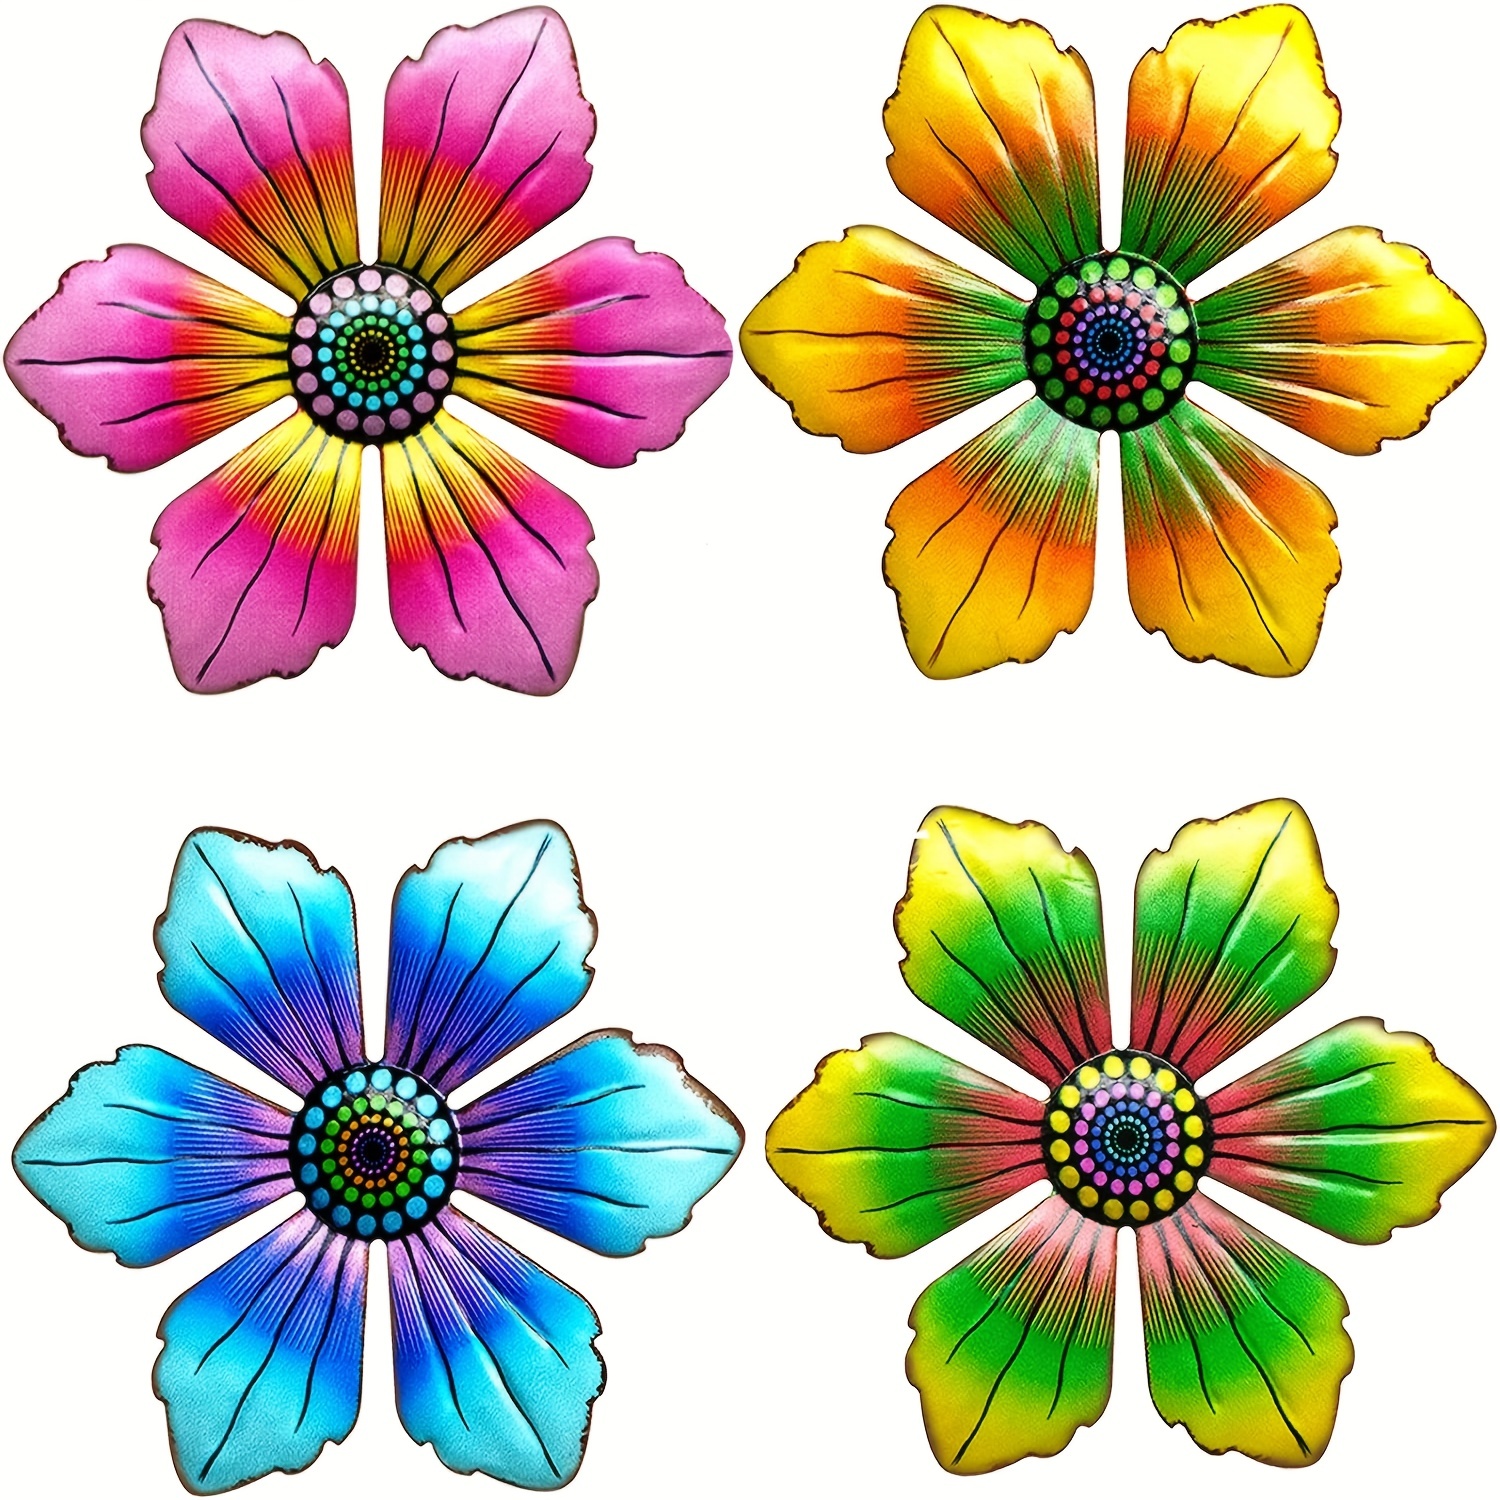 1pc Metal Flower Wall Art Decoration 3D Flowers Wall Decoration Colorful Garden Wall Sculpture Display Wall Decoration Bedroom Living Room Wedding Home Craft Decor Gift Decoration